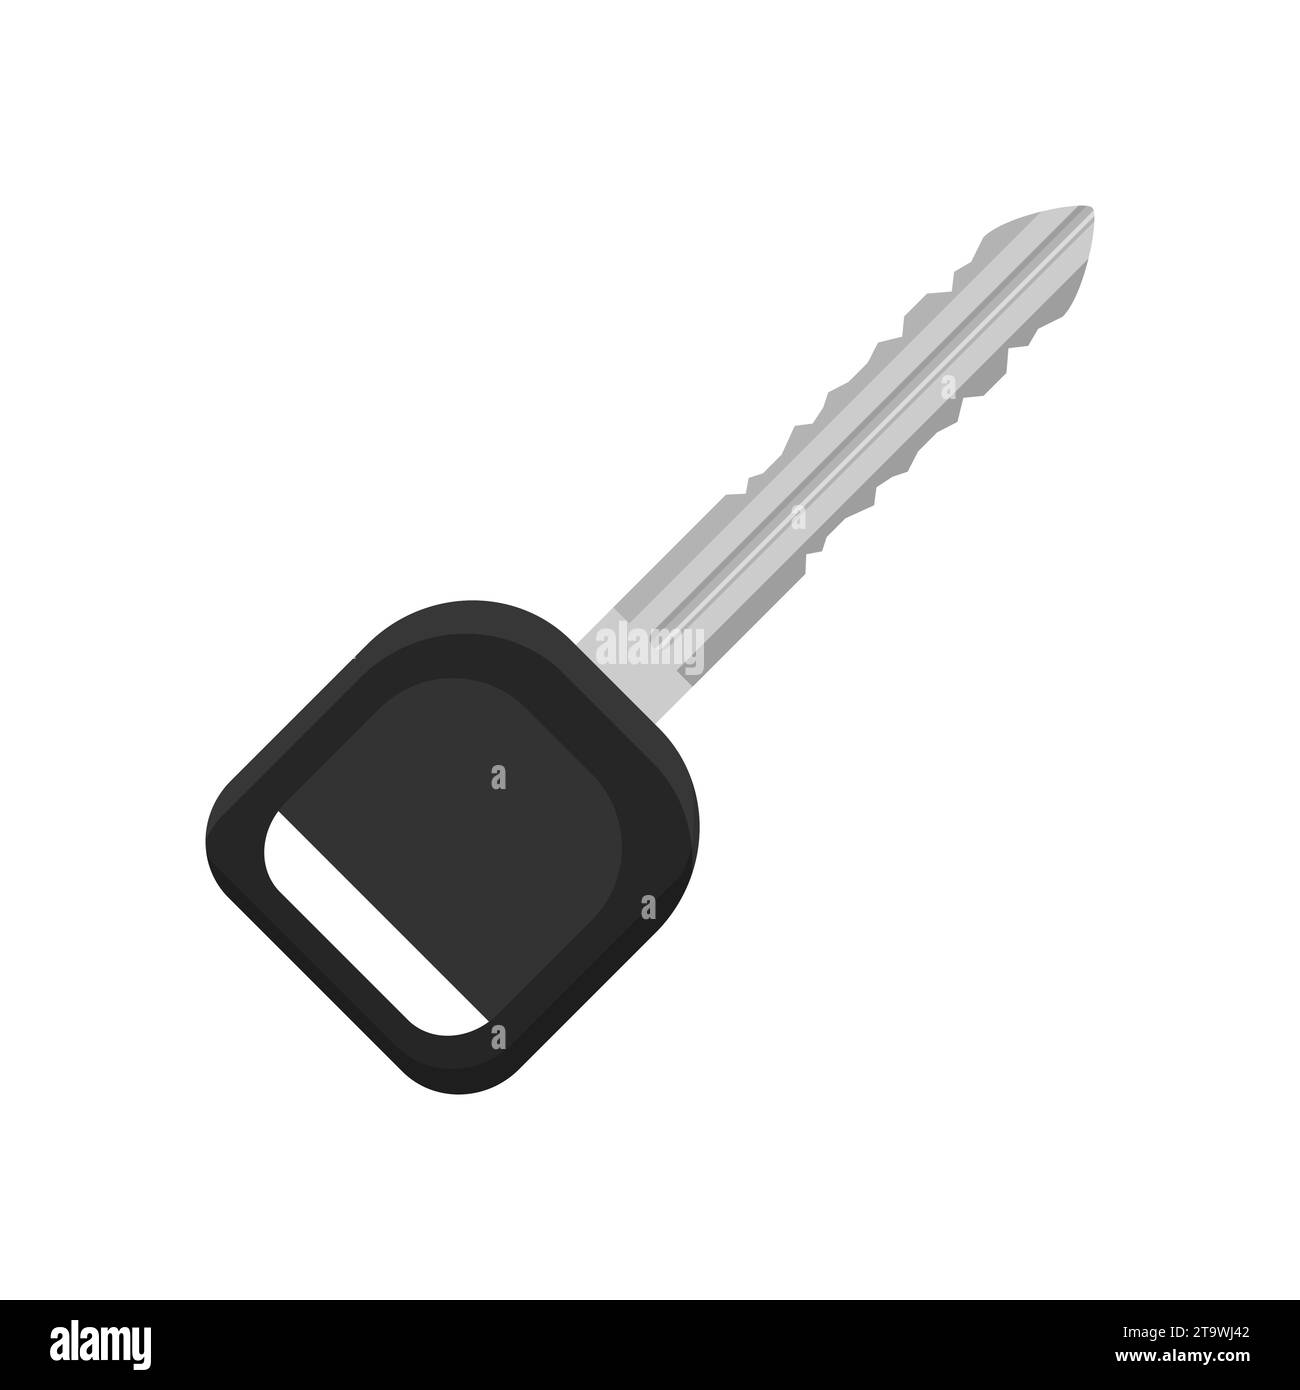 Car key icon isolated on white background. Auto lock security key. Vector illustration. Stock Vector